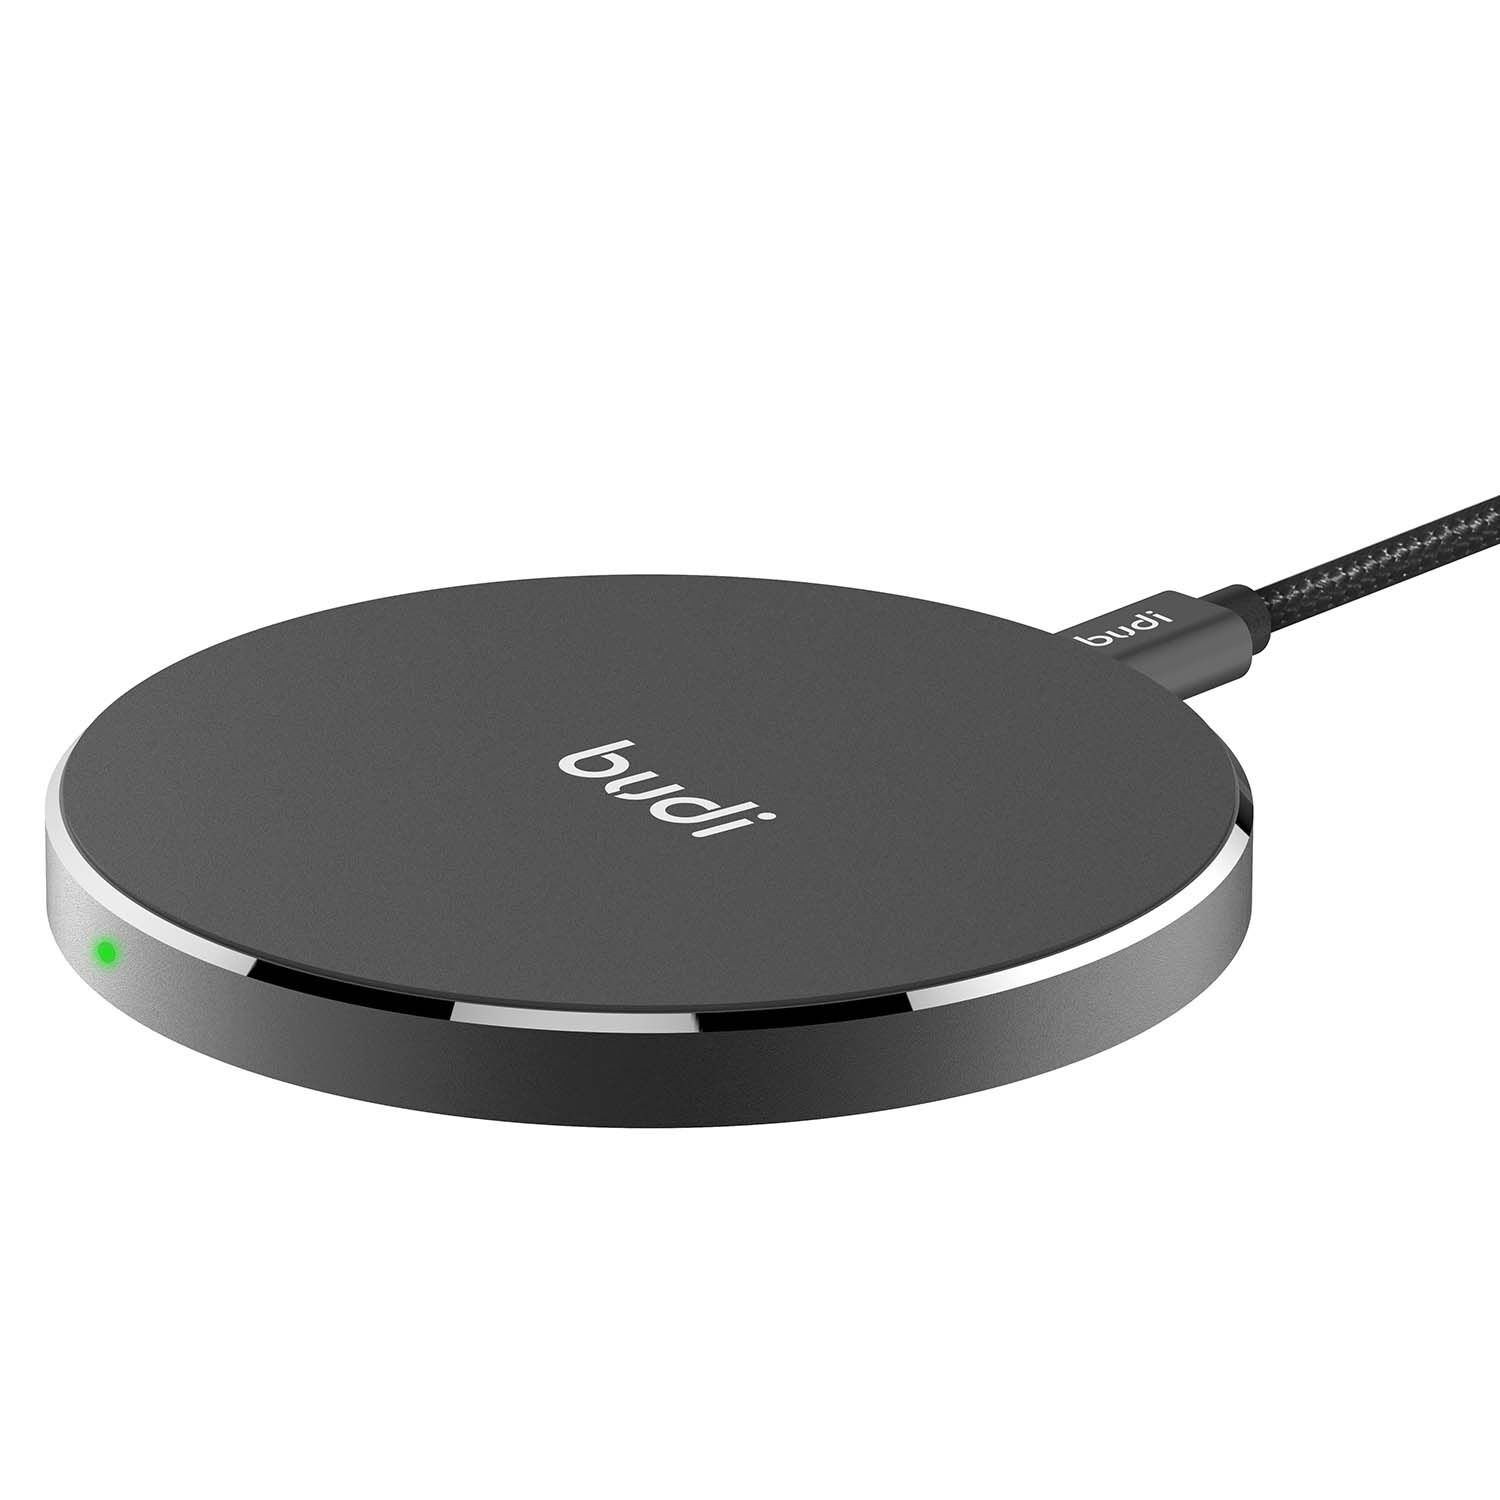 Budi black Wireless Charger Pad - Home Store + More